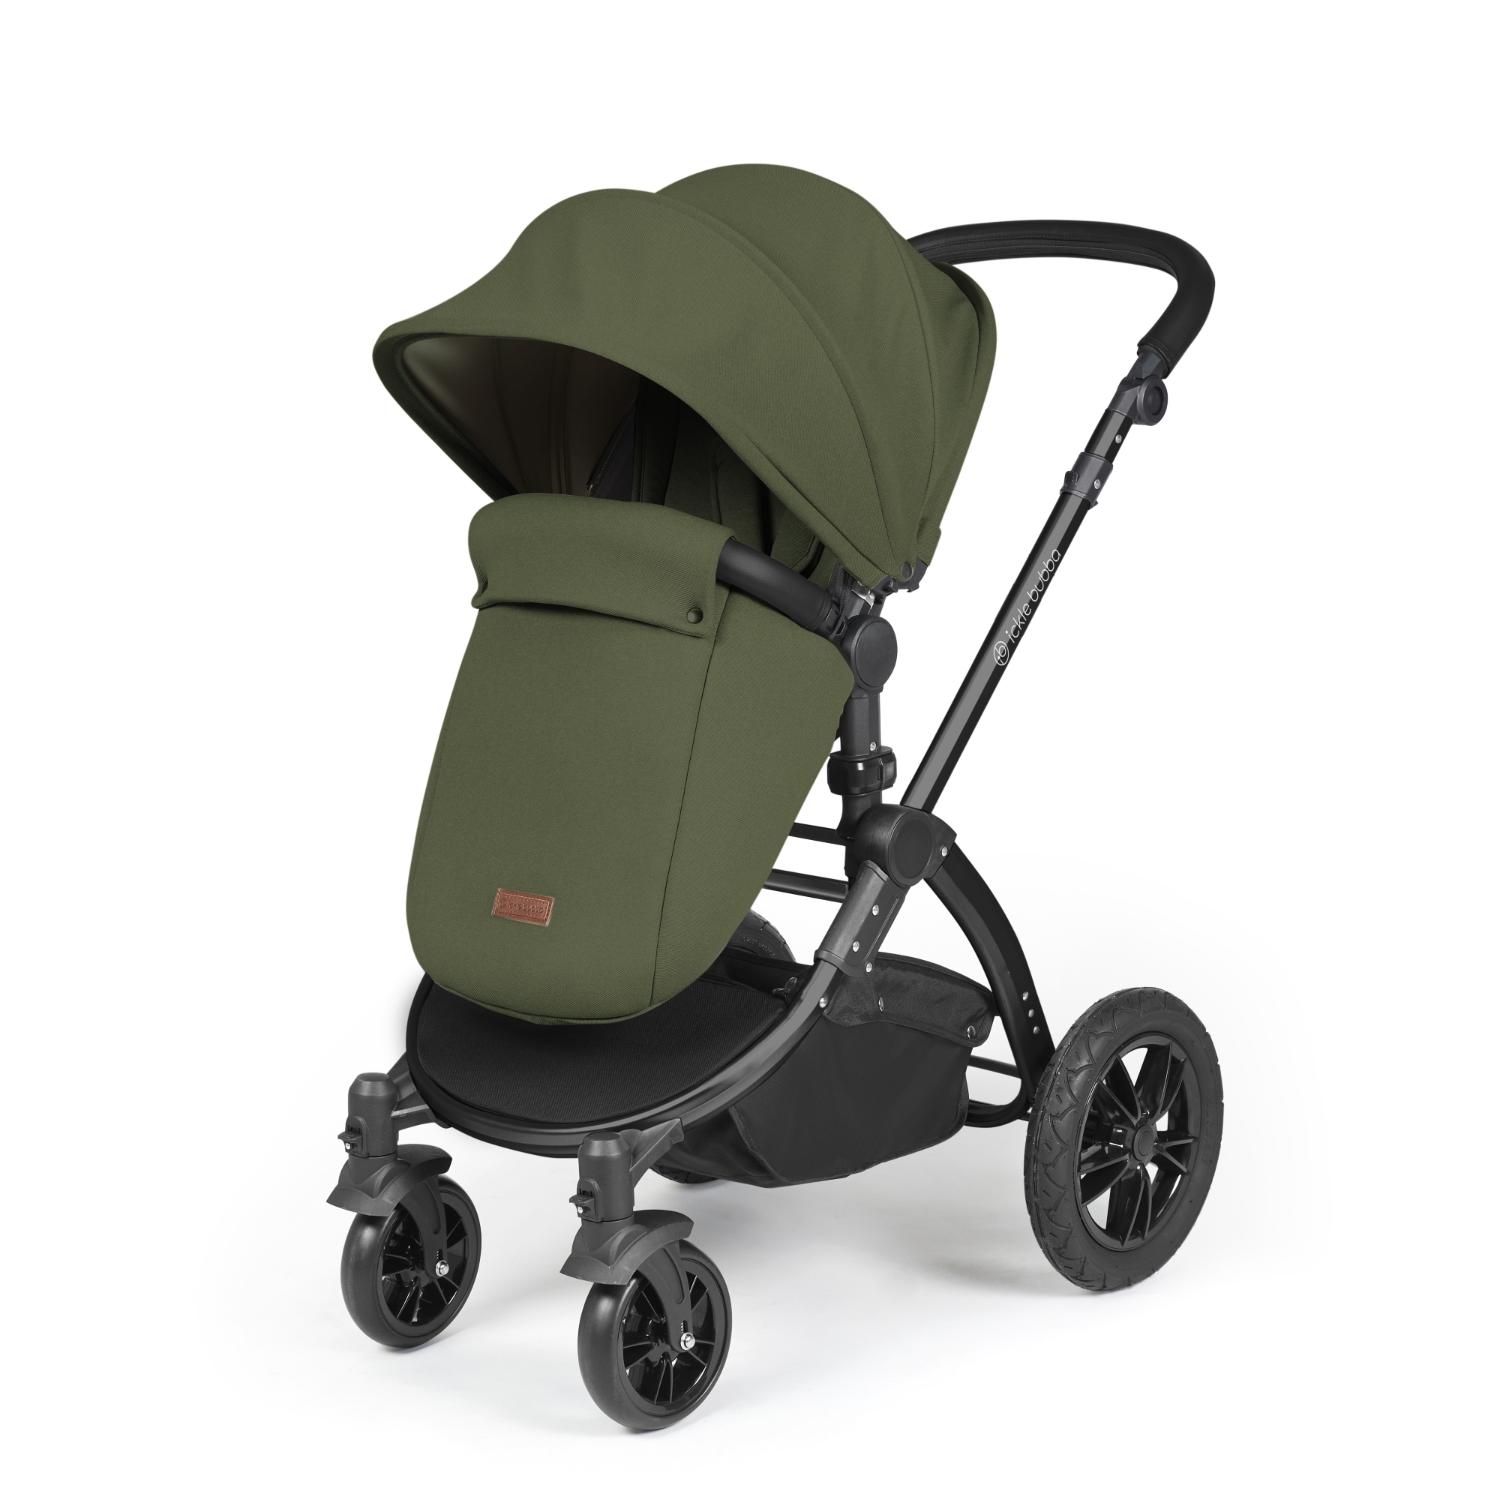 Ickle Bubba Stomp Luxe Pushchair with foot warmer attached in Woodland green colour